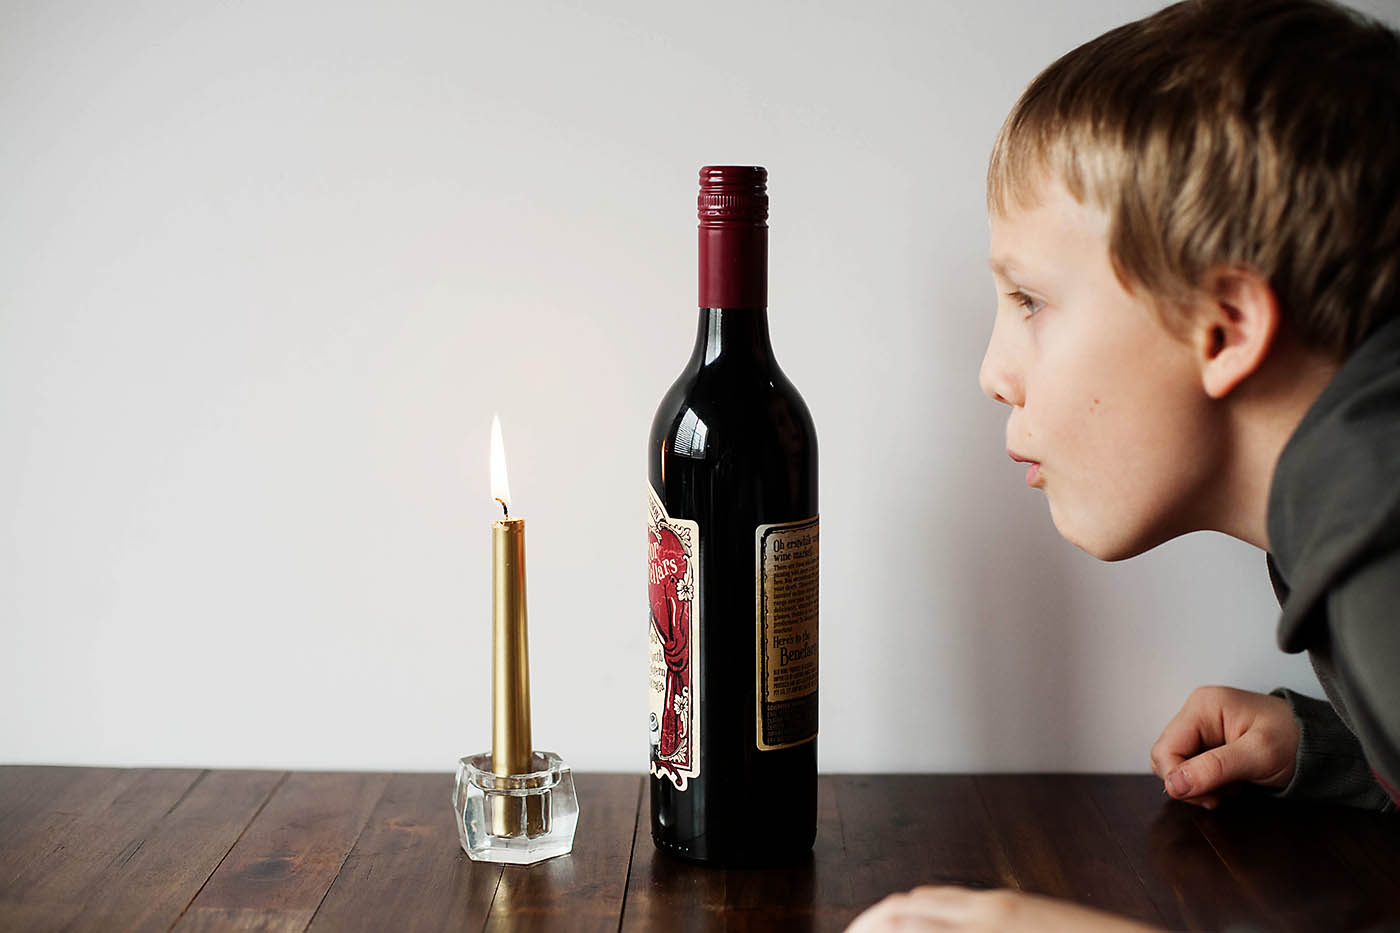 Can you blow out a candle through a bottle?